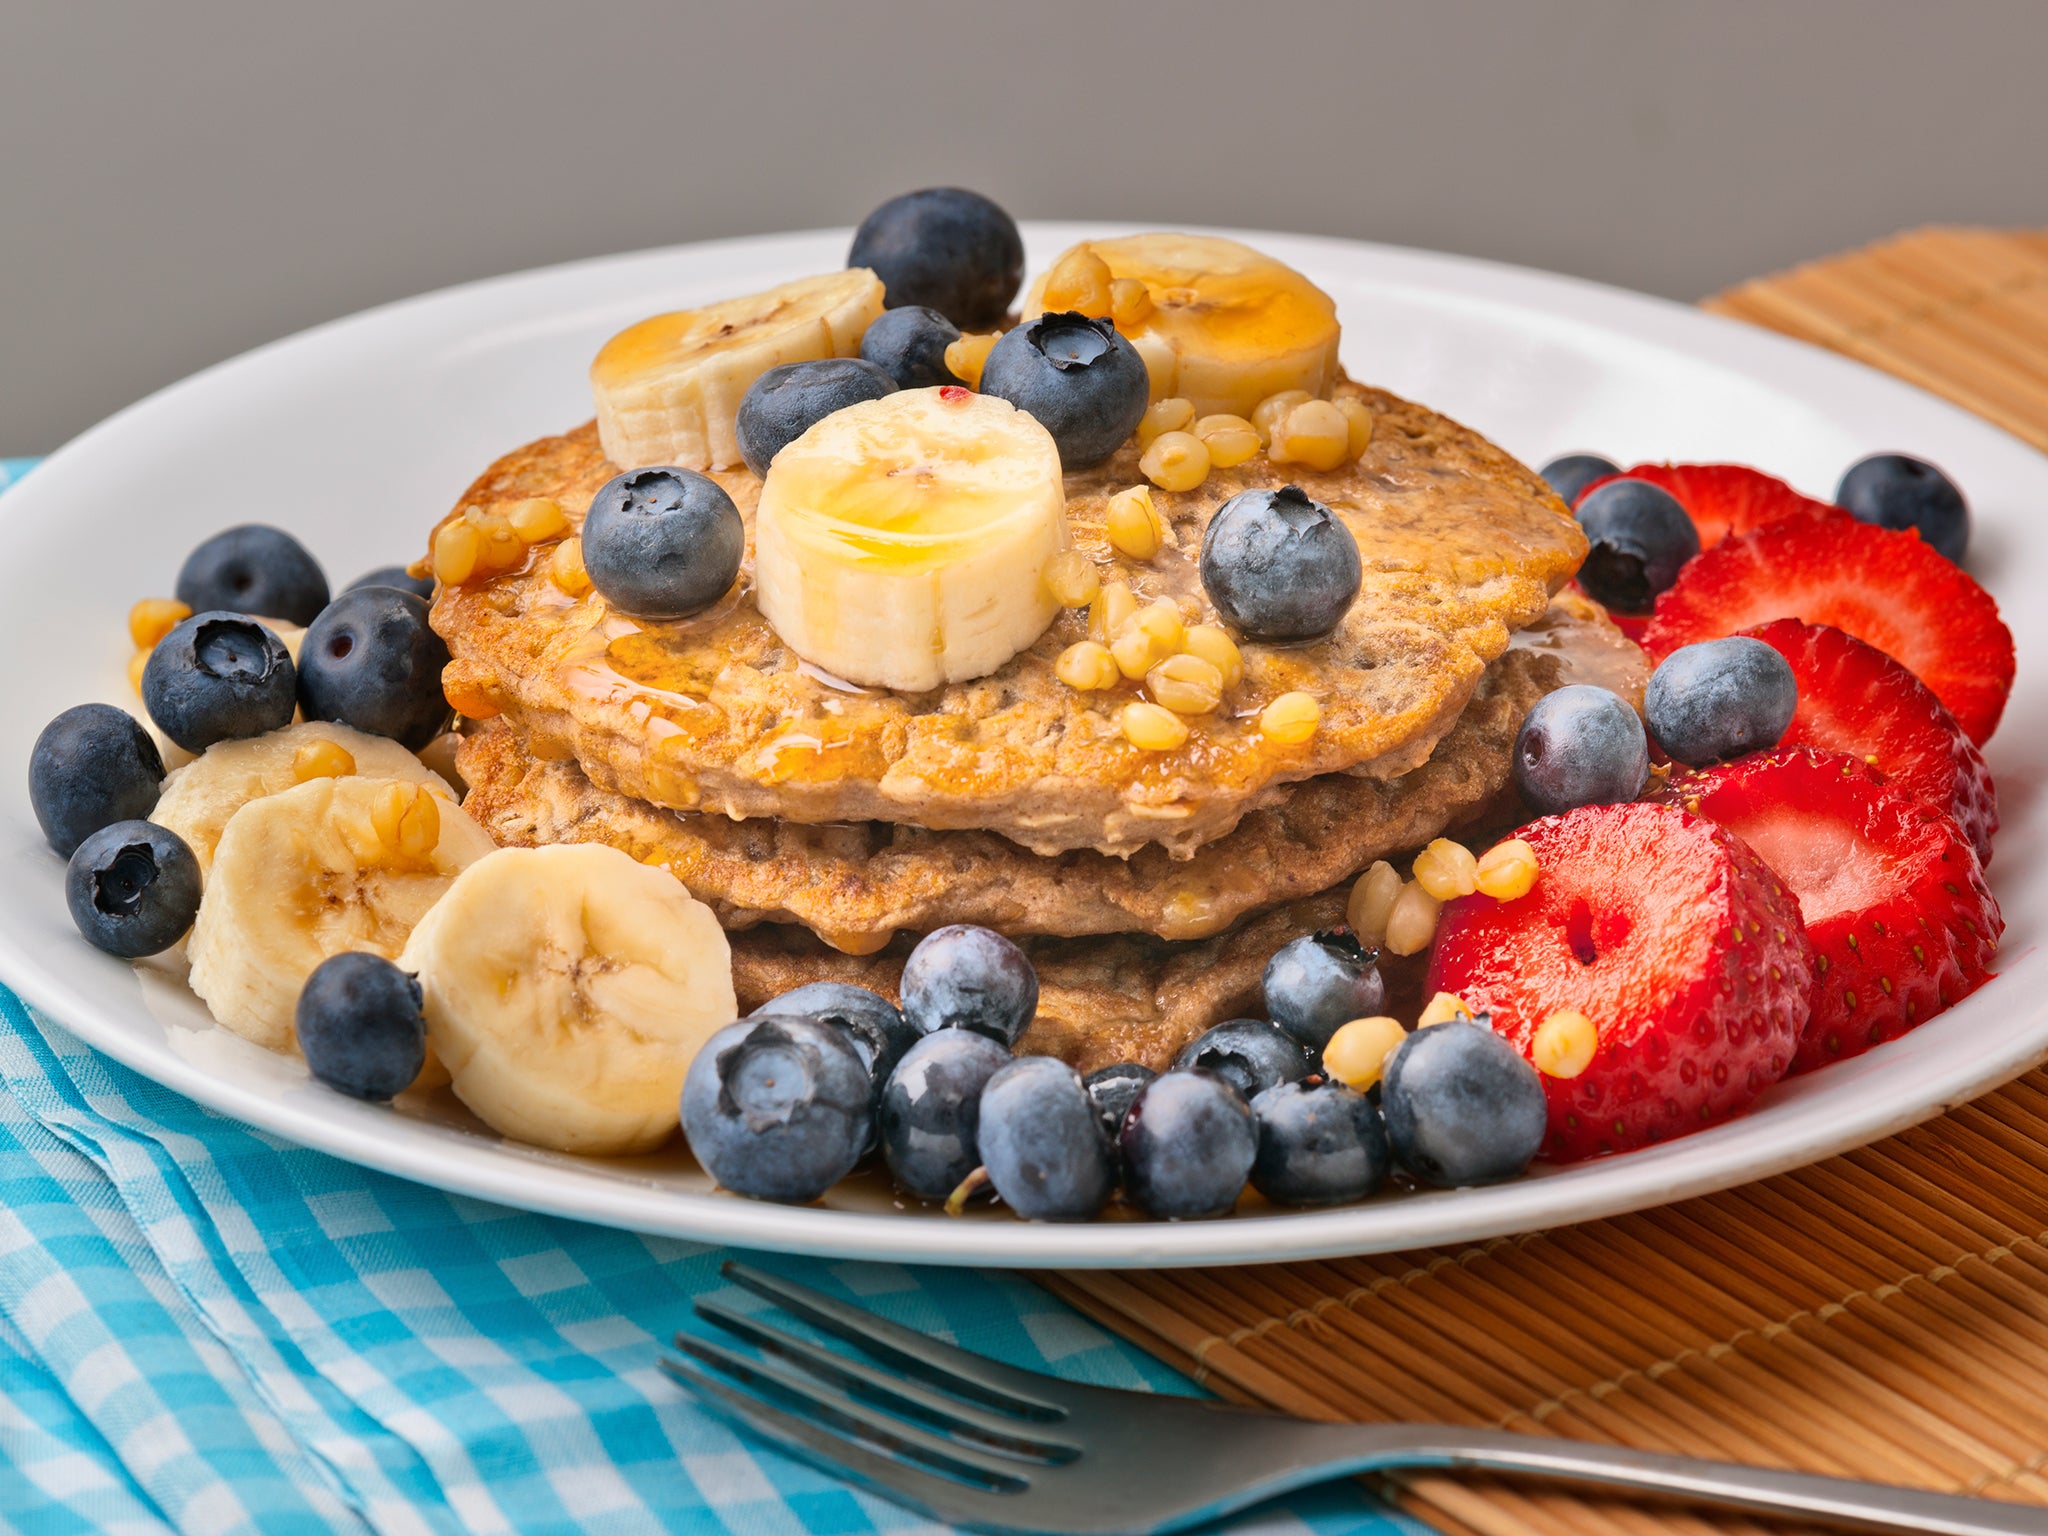 Pancakes don't have to be filled with sugar and saturated fat to be enjoyable